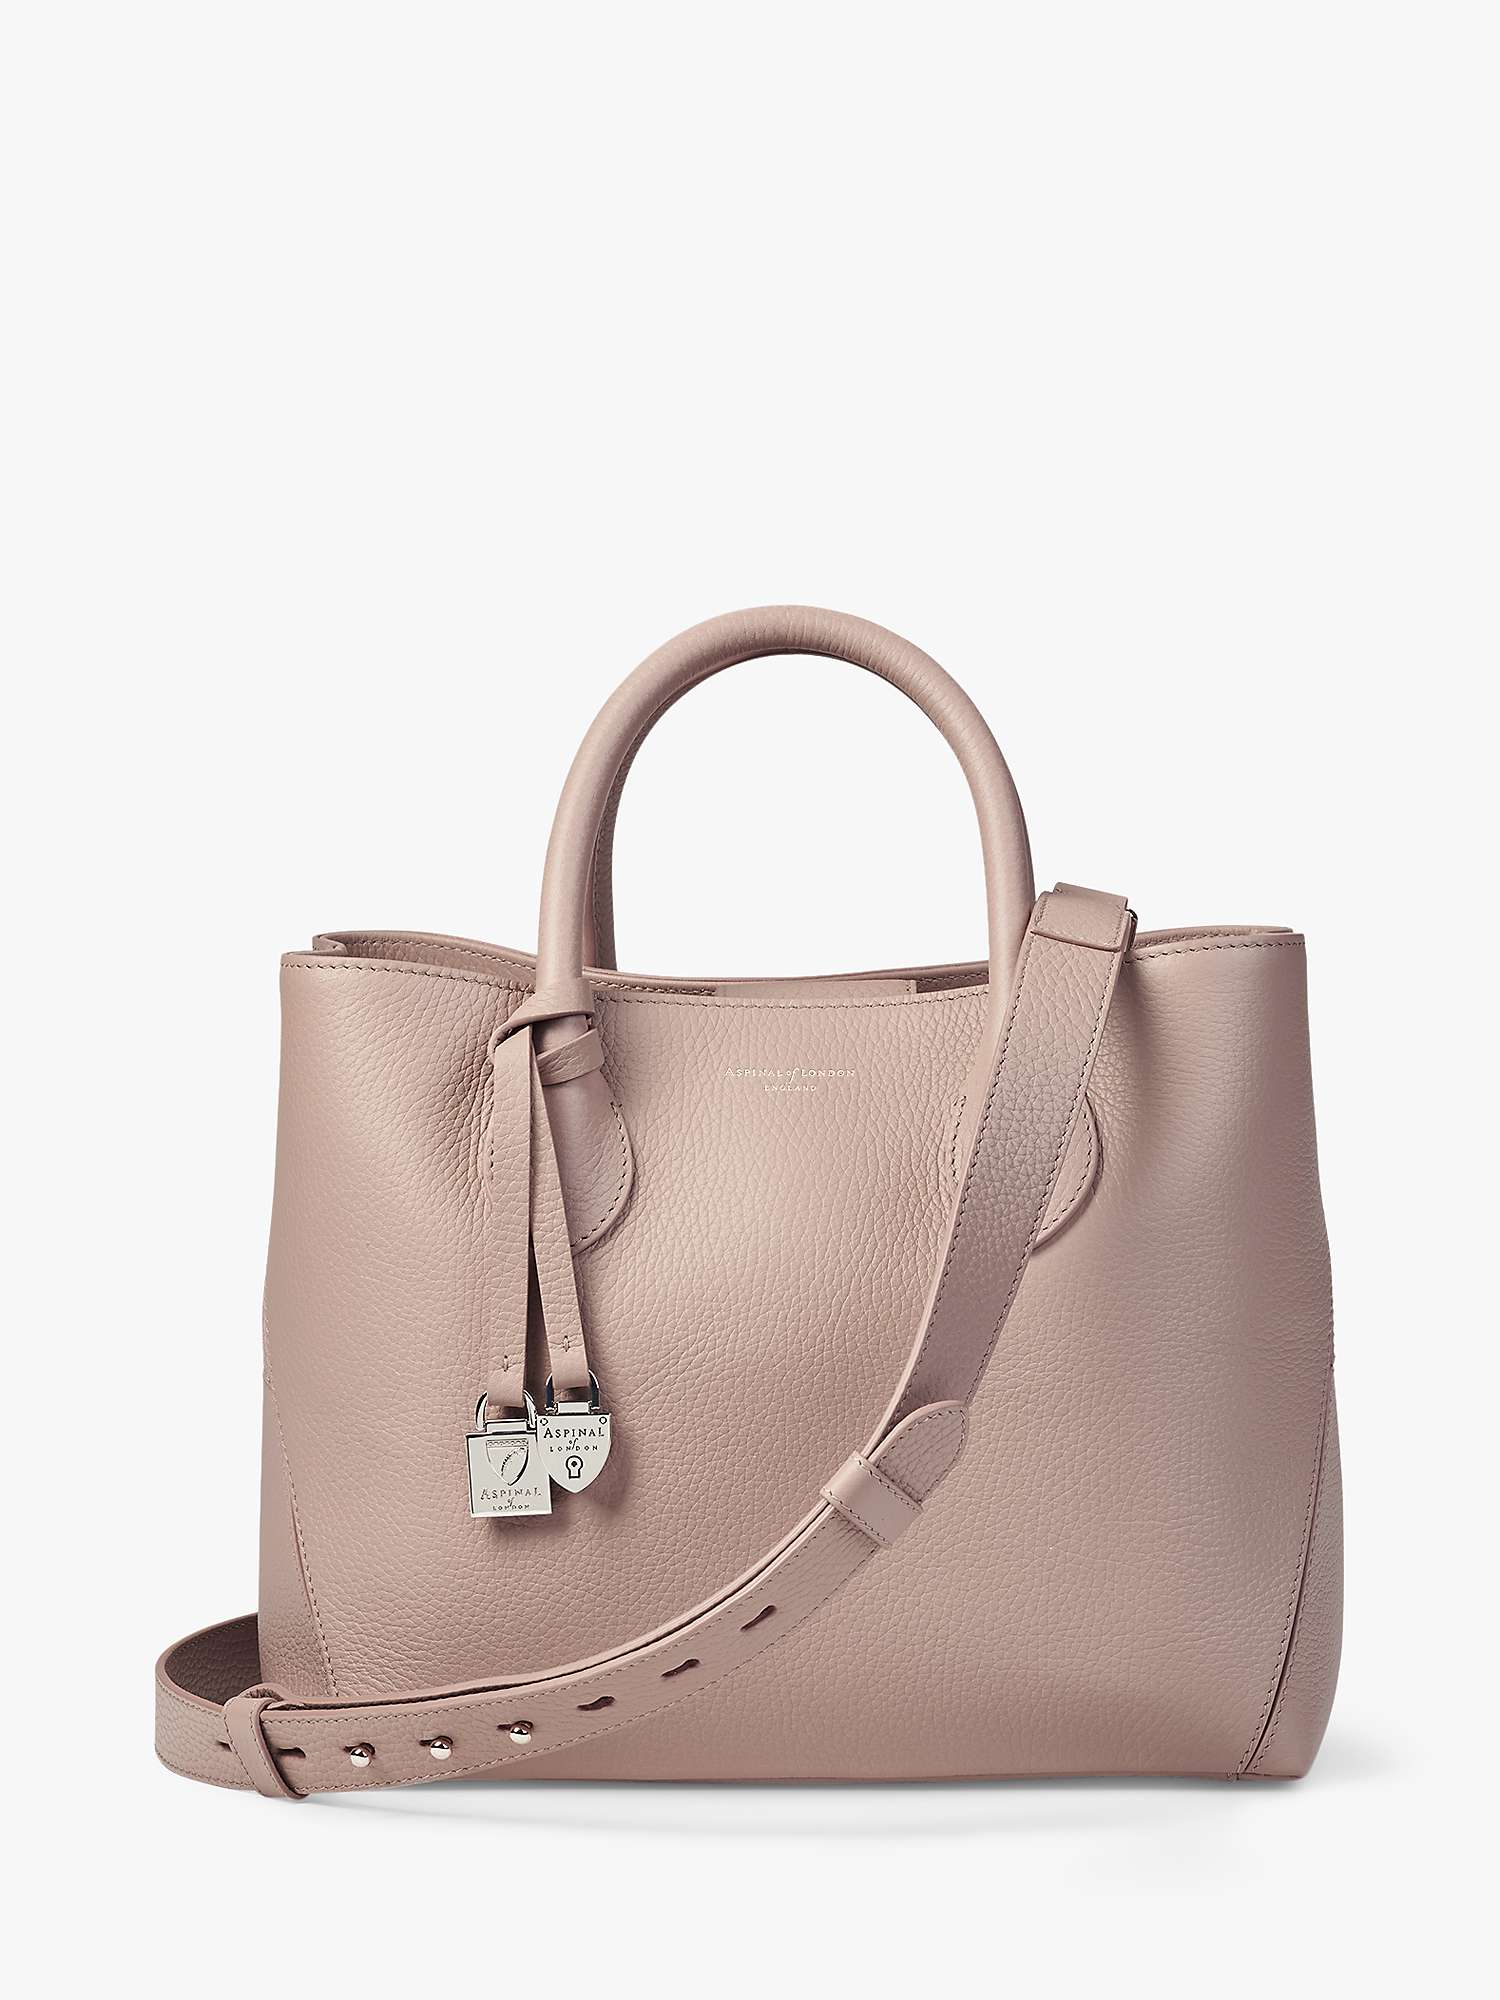 Buy Aspinal of London Midi London Leather Tote Bag, Soft Taupe Online at johnlewis.com